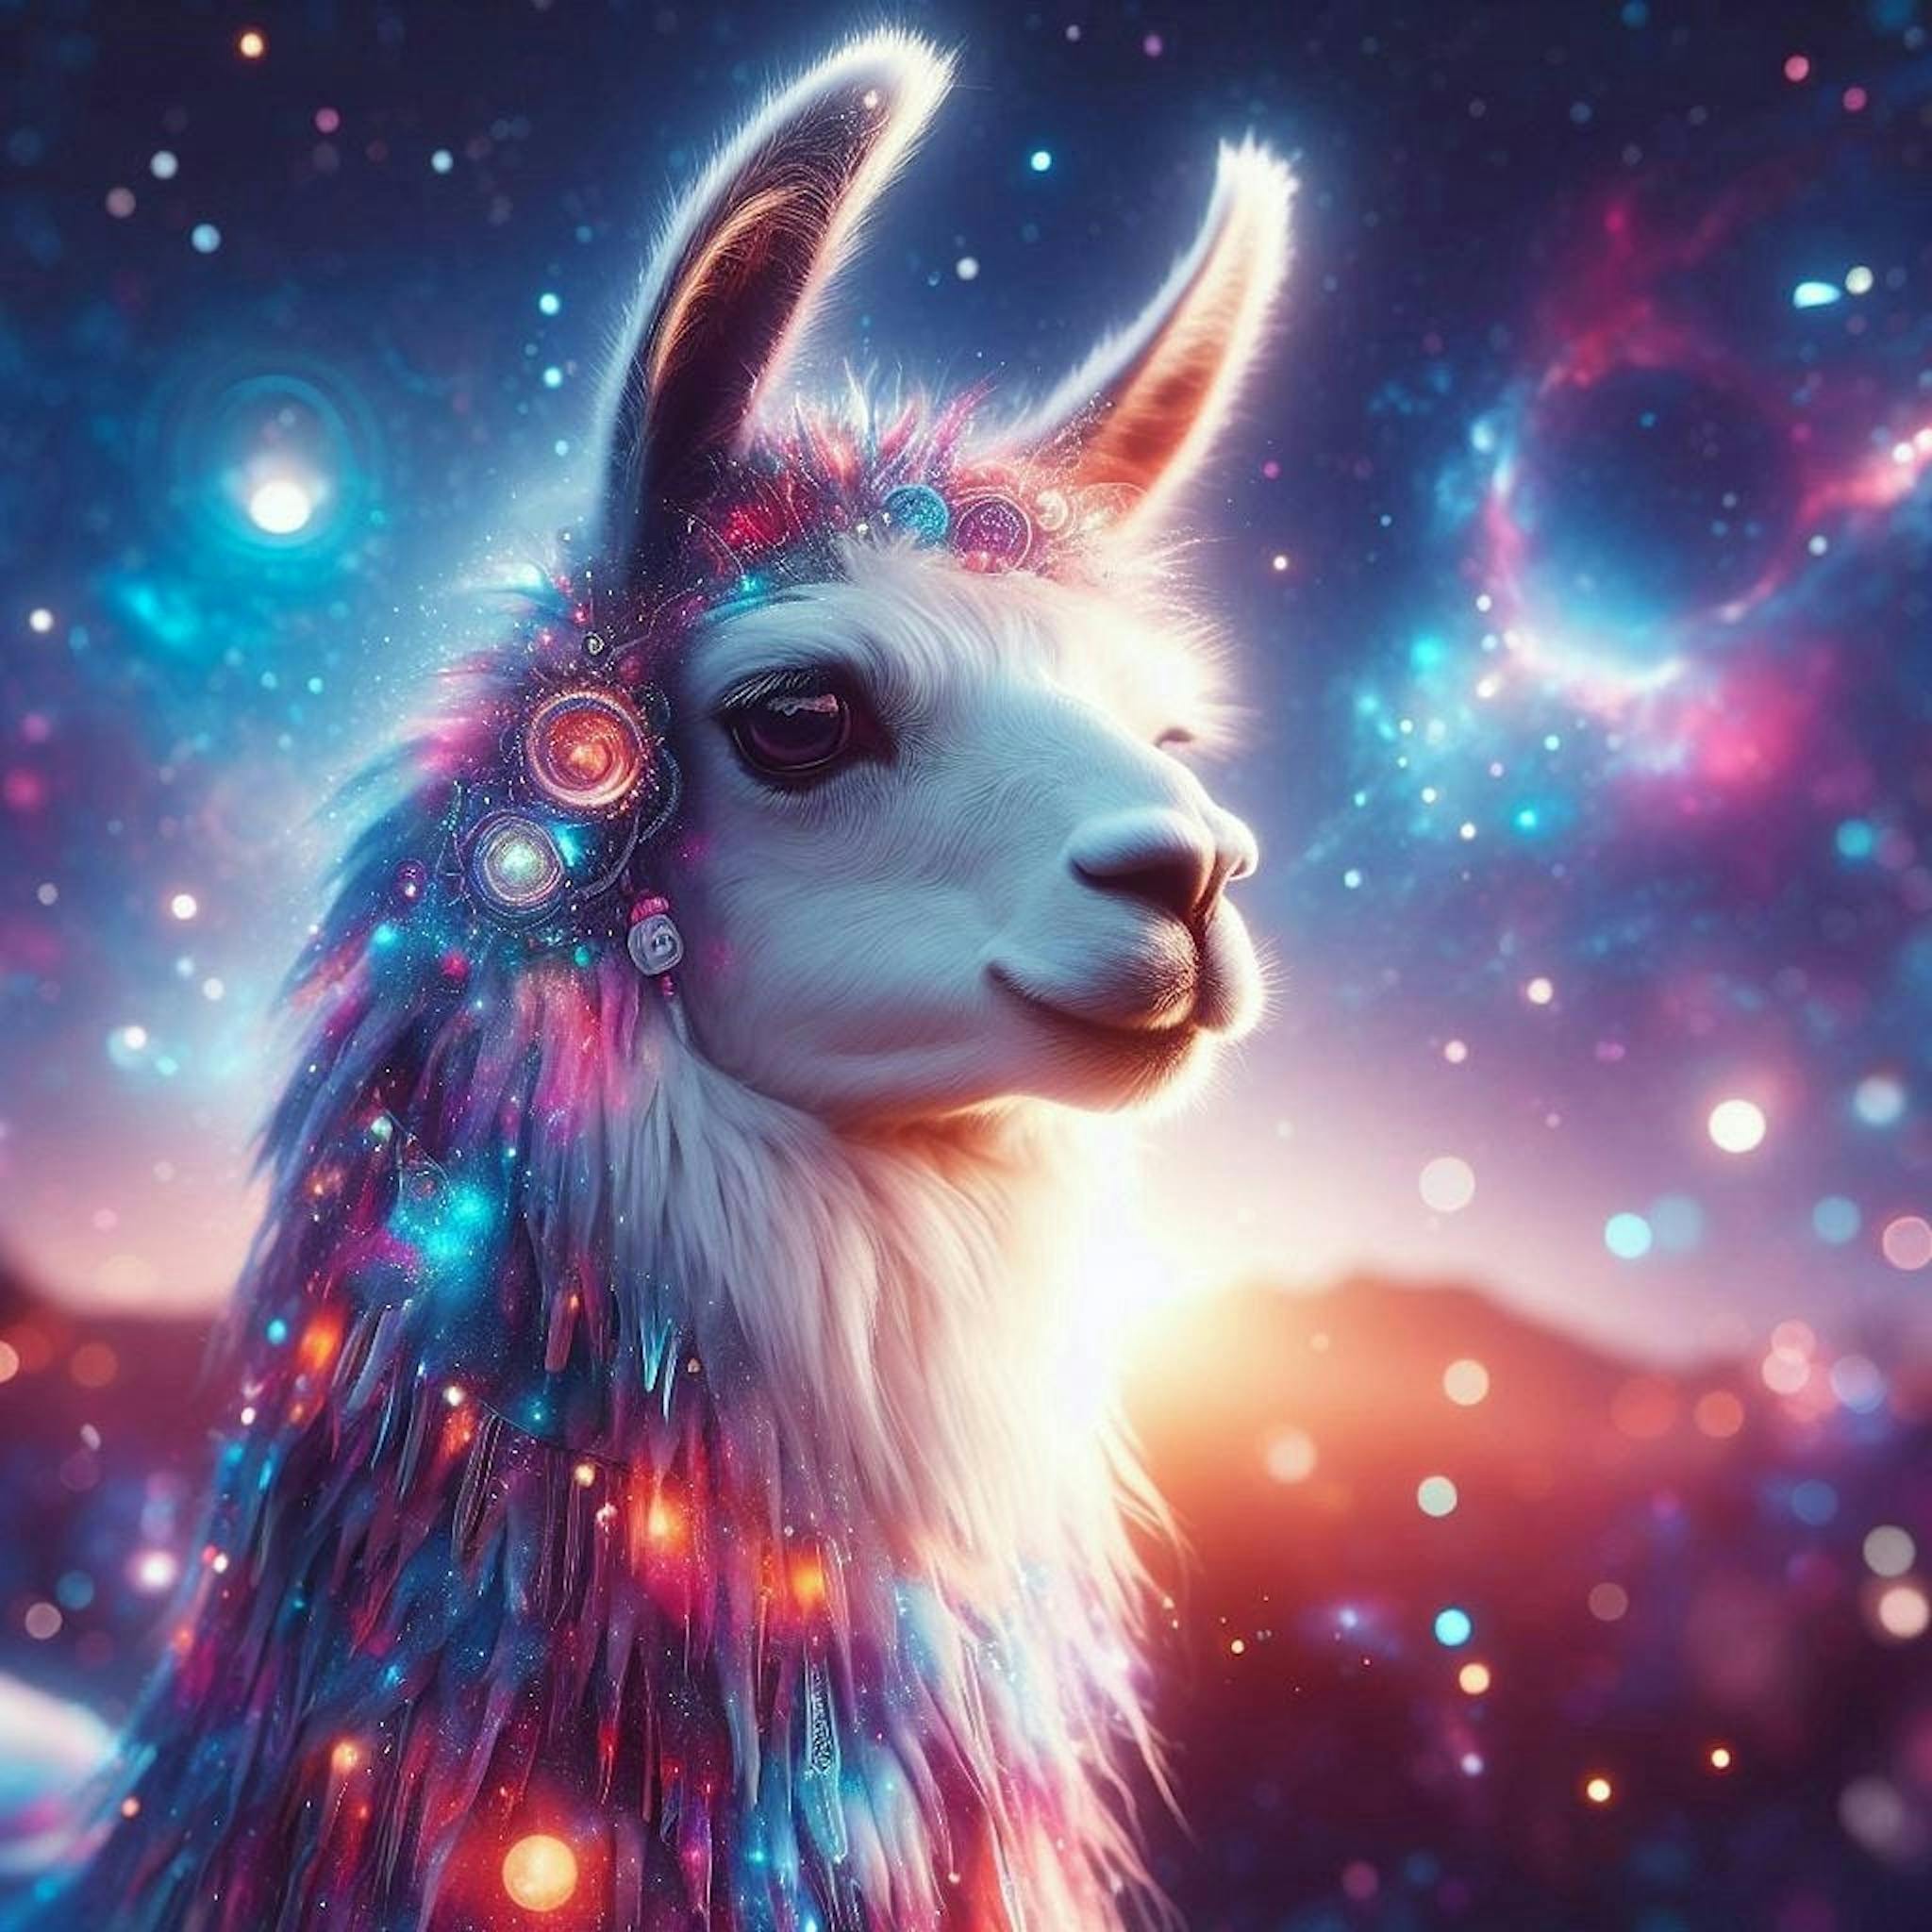 Now that’s a spectacular Llama!